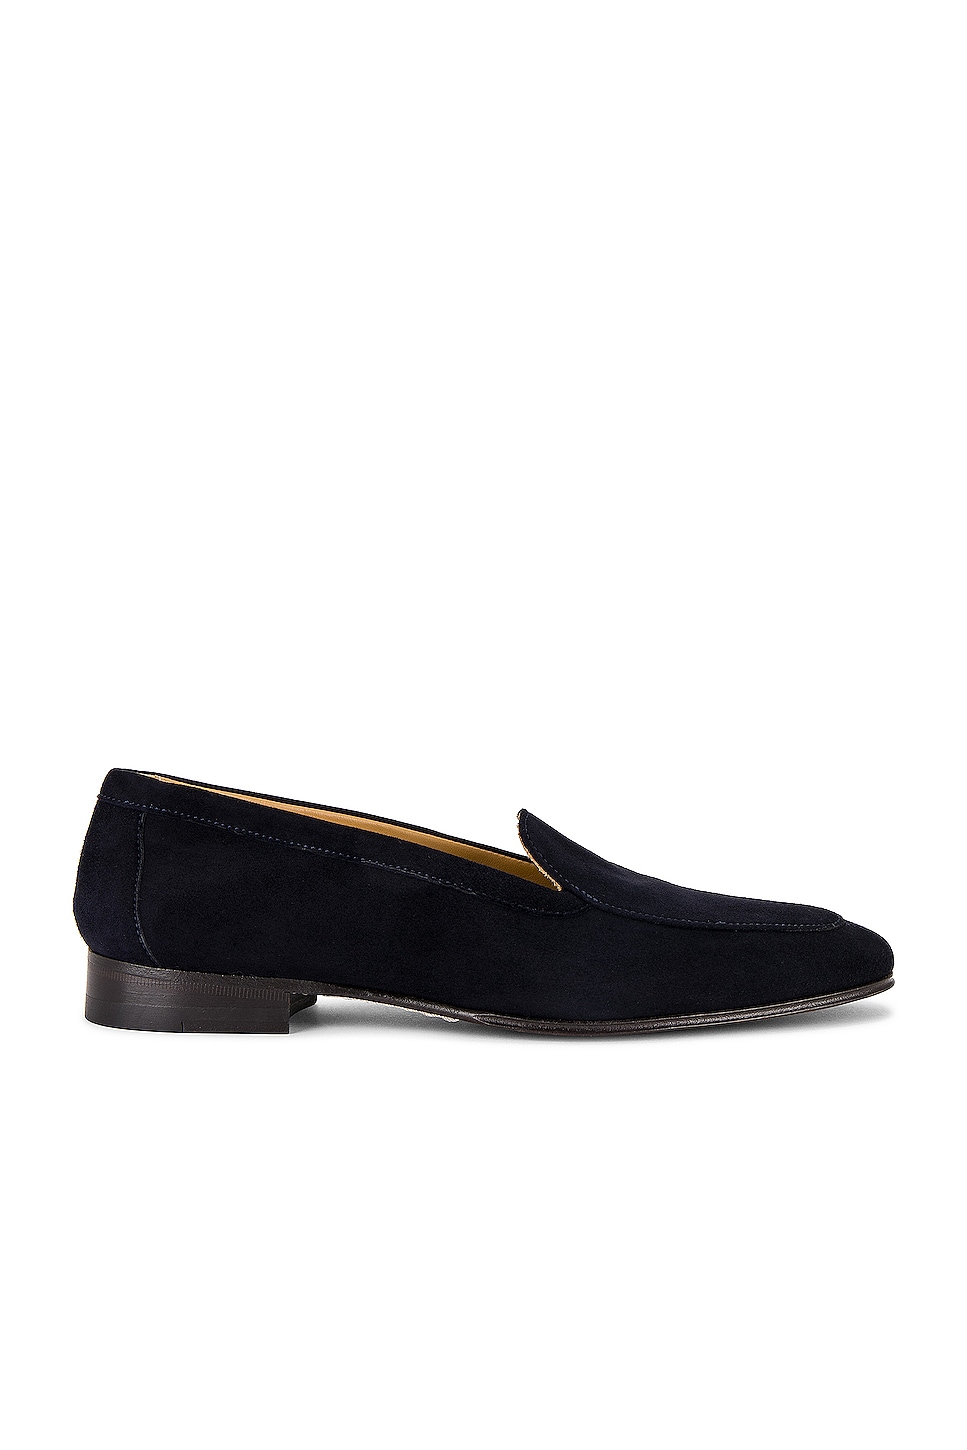 Image 1 of The Row Sophie Loafer in DEEP NAVY